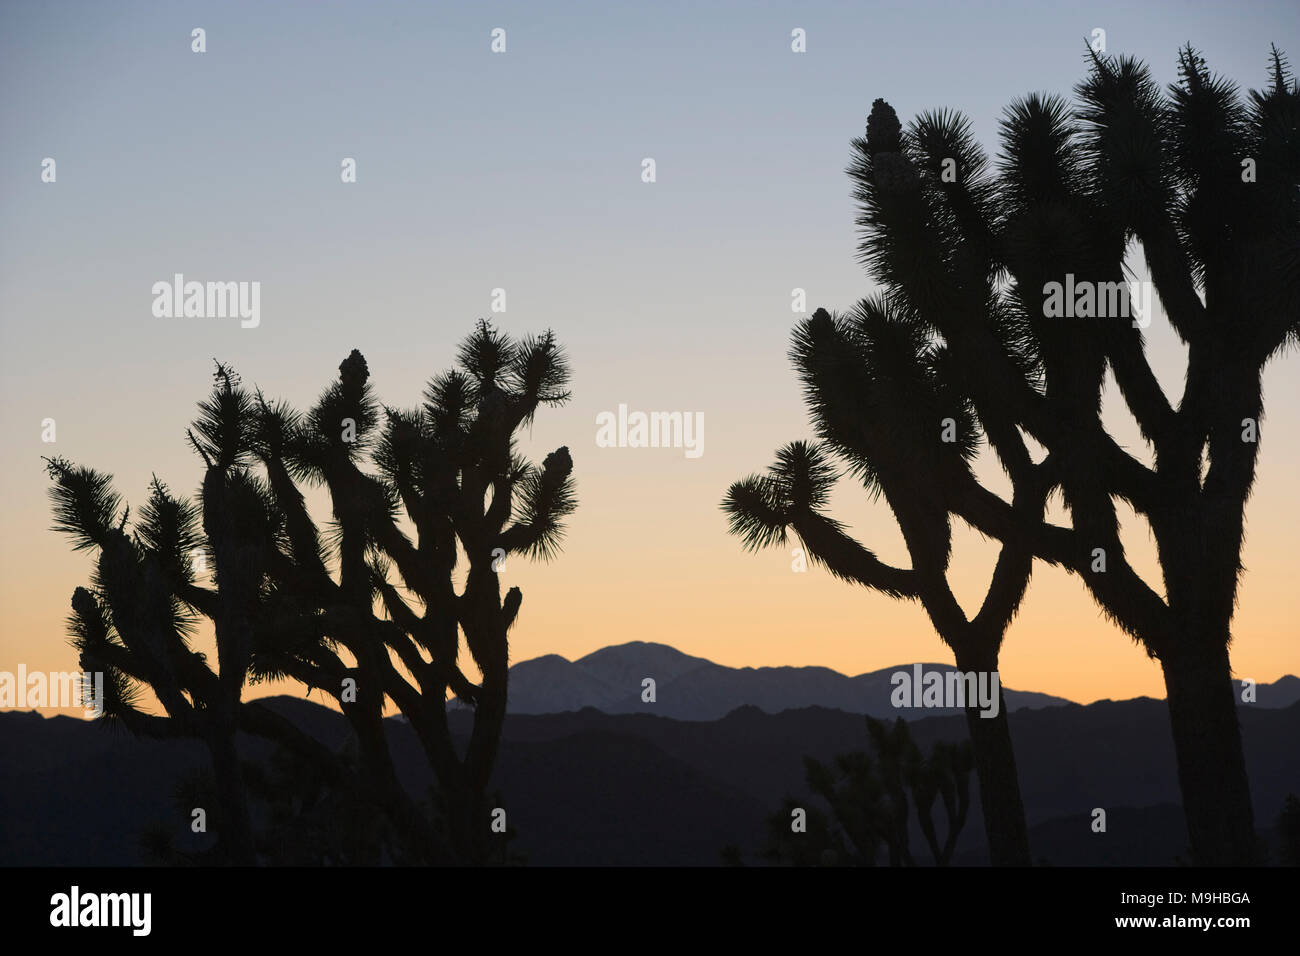 Sunset over the mountains in Joshua tree national Park in Southern California’s Mojave desert with weirdly form Joshua trees in the foreground Stock Photo